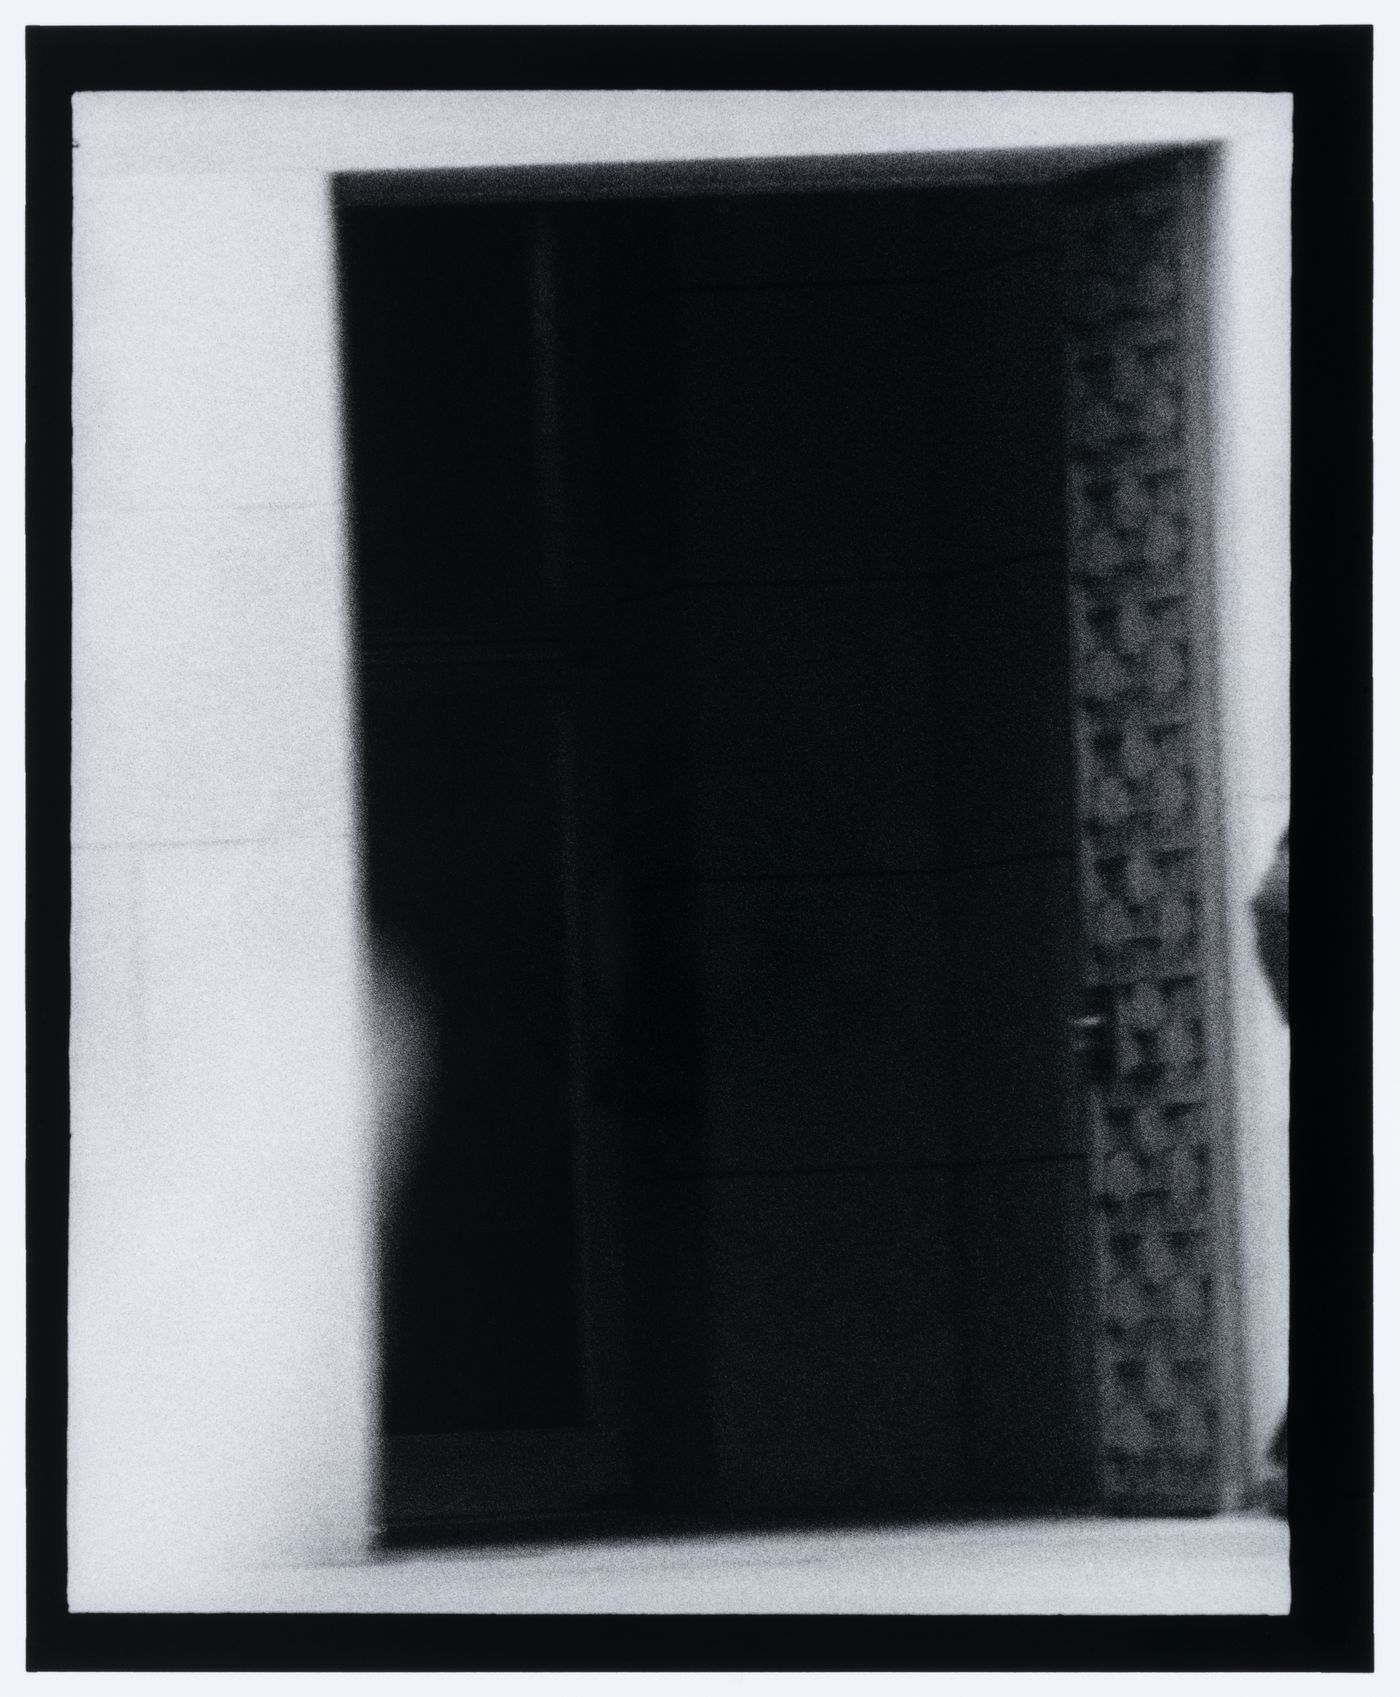 View of an open doorway to the Rayburn House Office building, Washington D.C., United States, from the series "Empire"